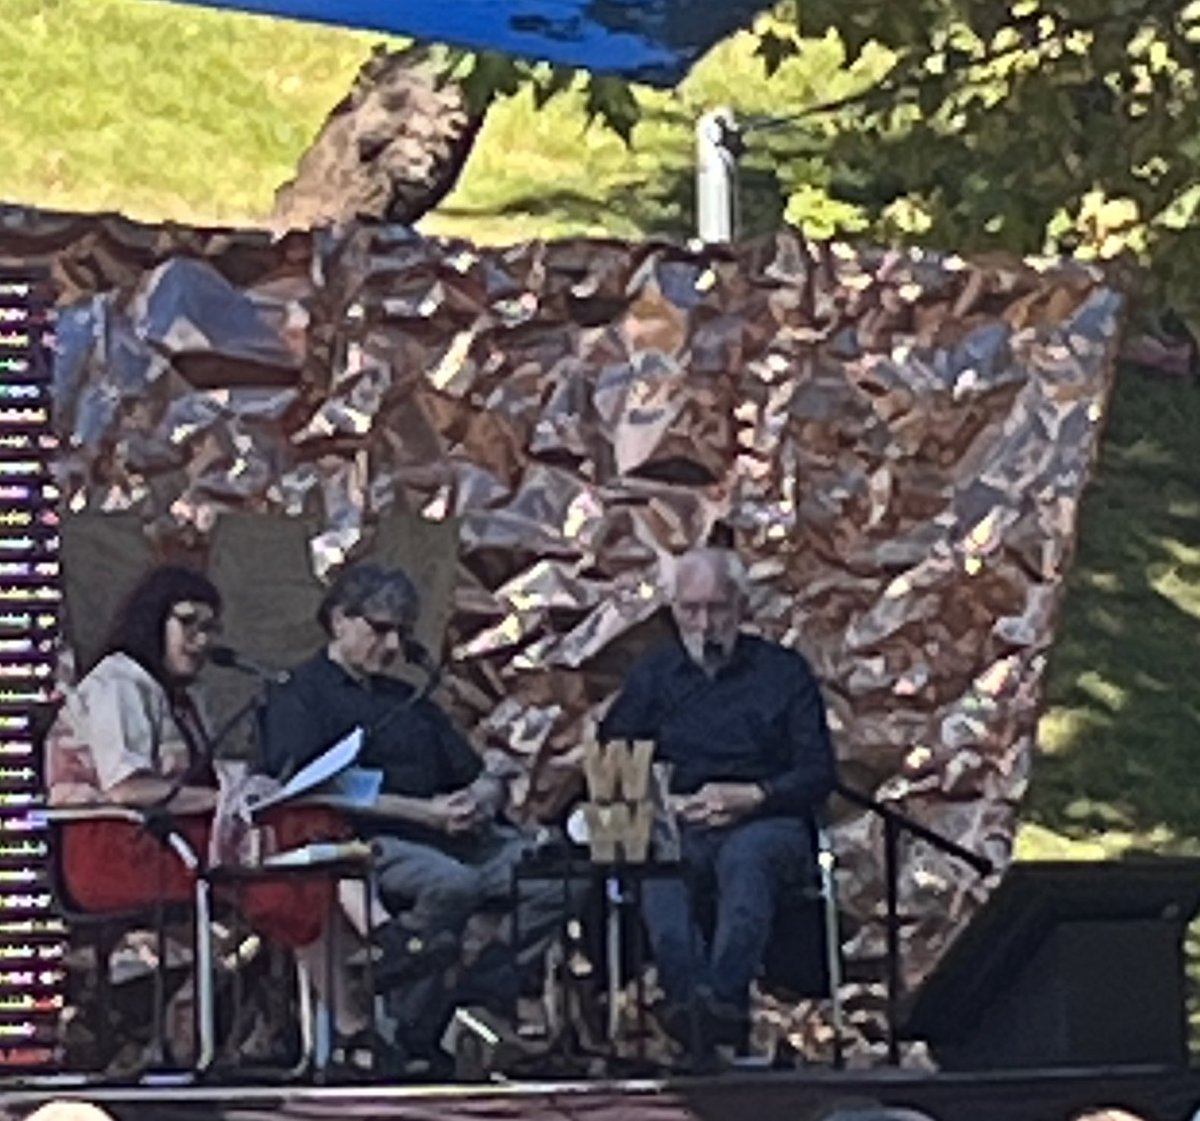 Young adults most at risk of #MentalHealth problems. Treat early, comprehensively and holistically. There is recovery. Much greater risk of treating too late than too early - Patrick McGorry #MentalHealthMatters @natashamitchell @adelwritersweek #AdlWW